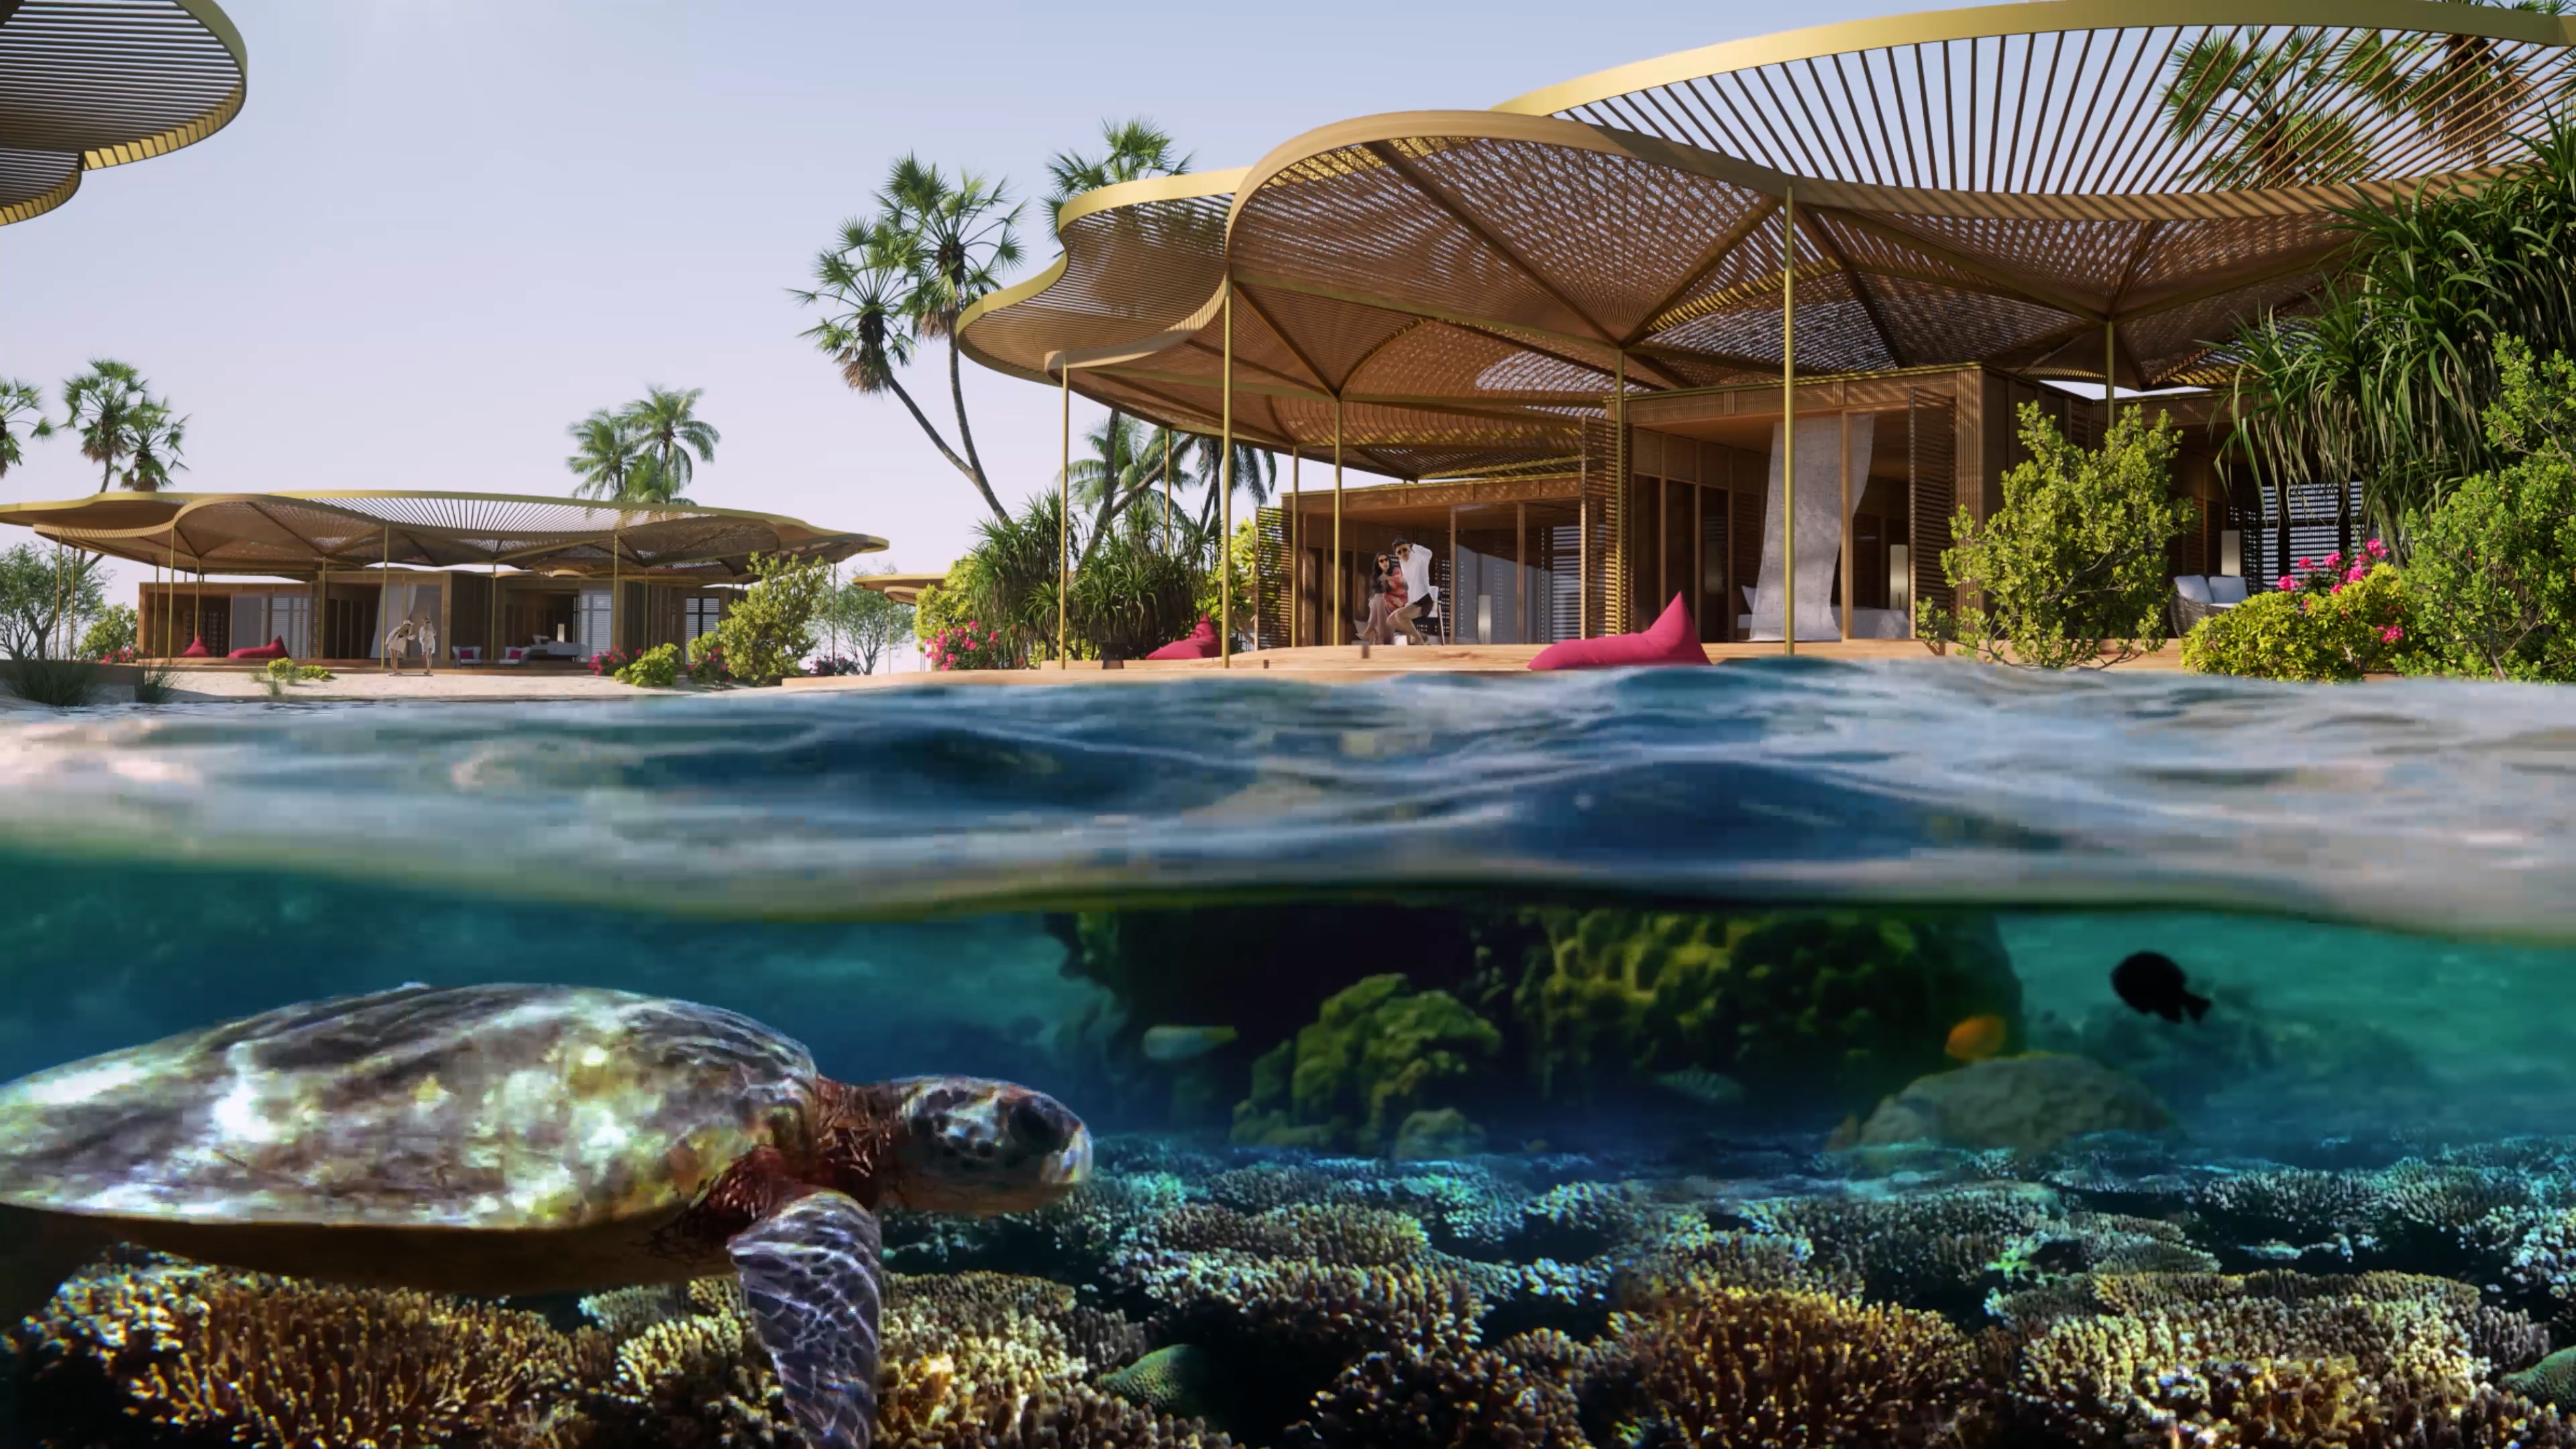 Coral Bloom blends hotels with nature